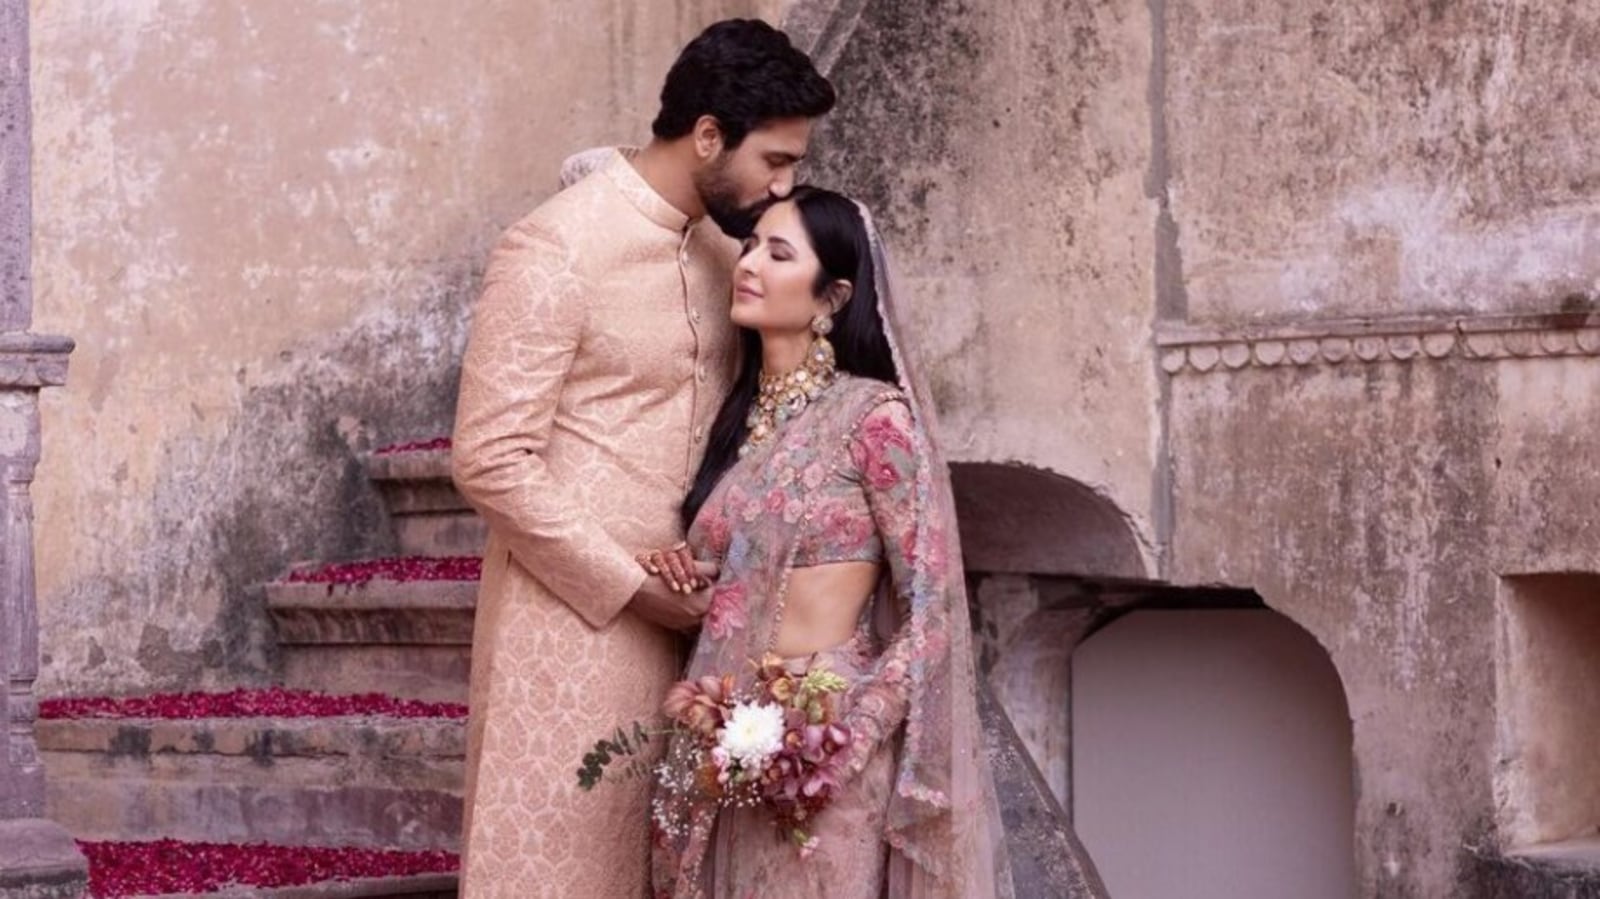 Katrina Kaif and Vicky Kaushal share their most romantic pics yet from